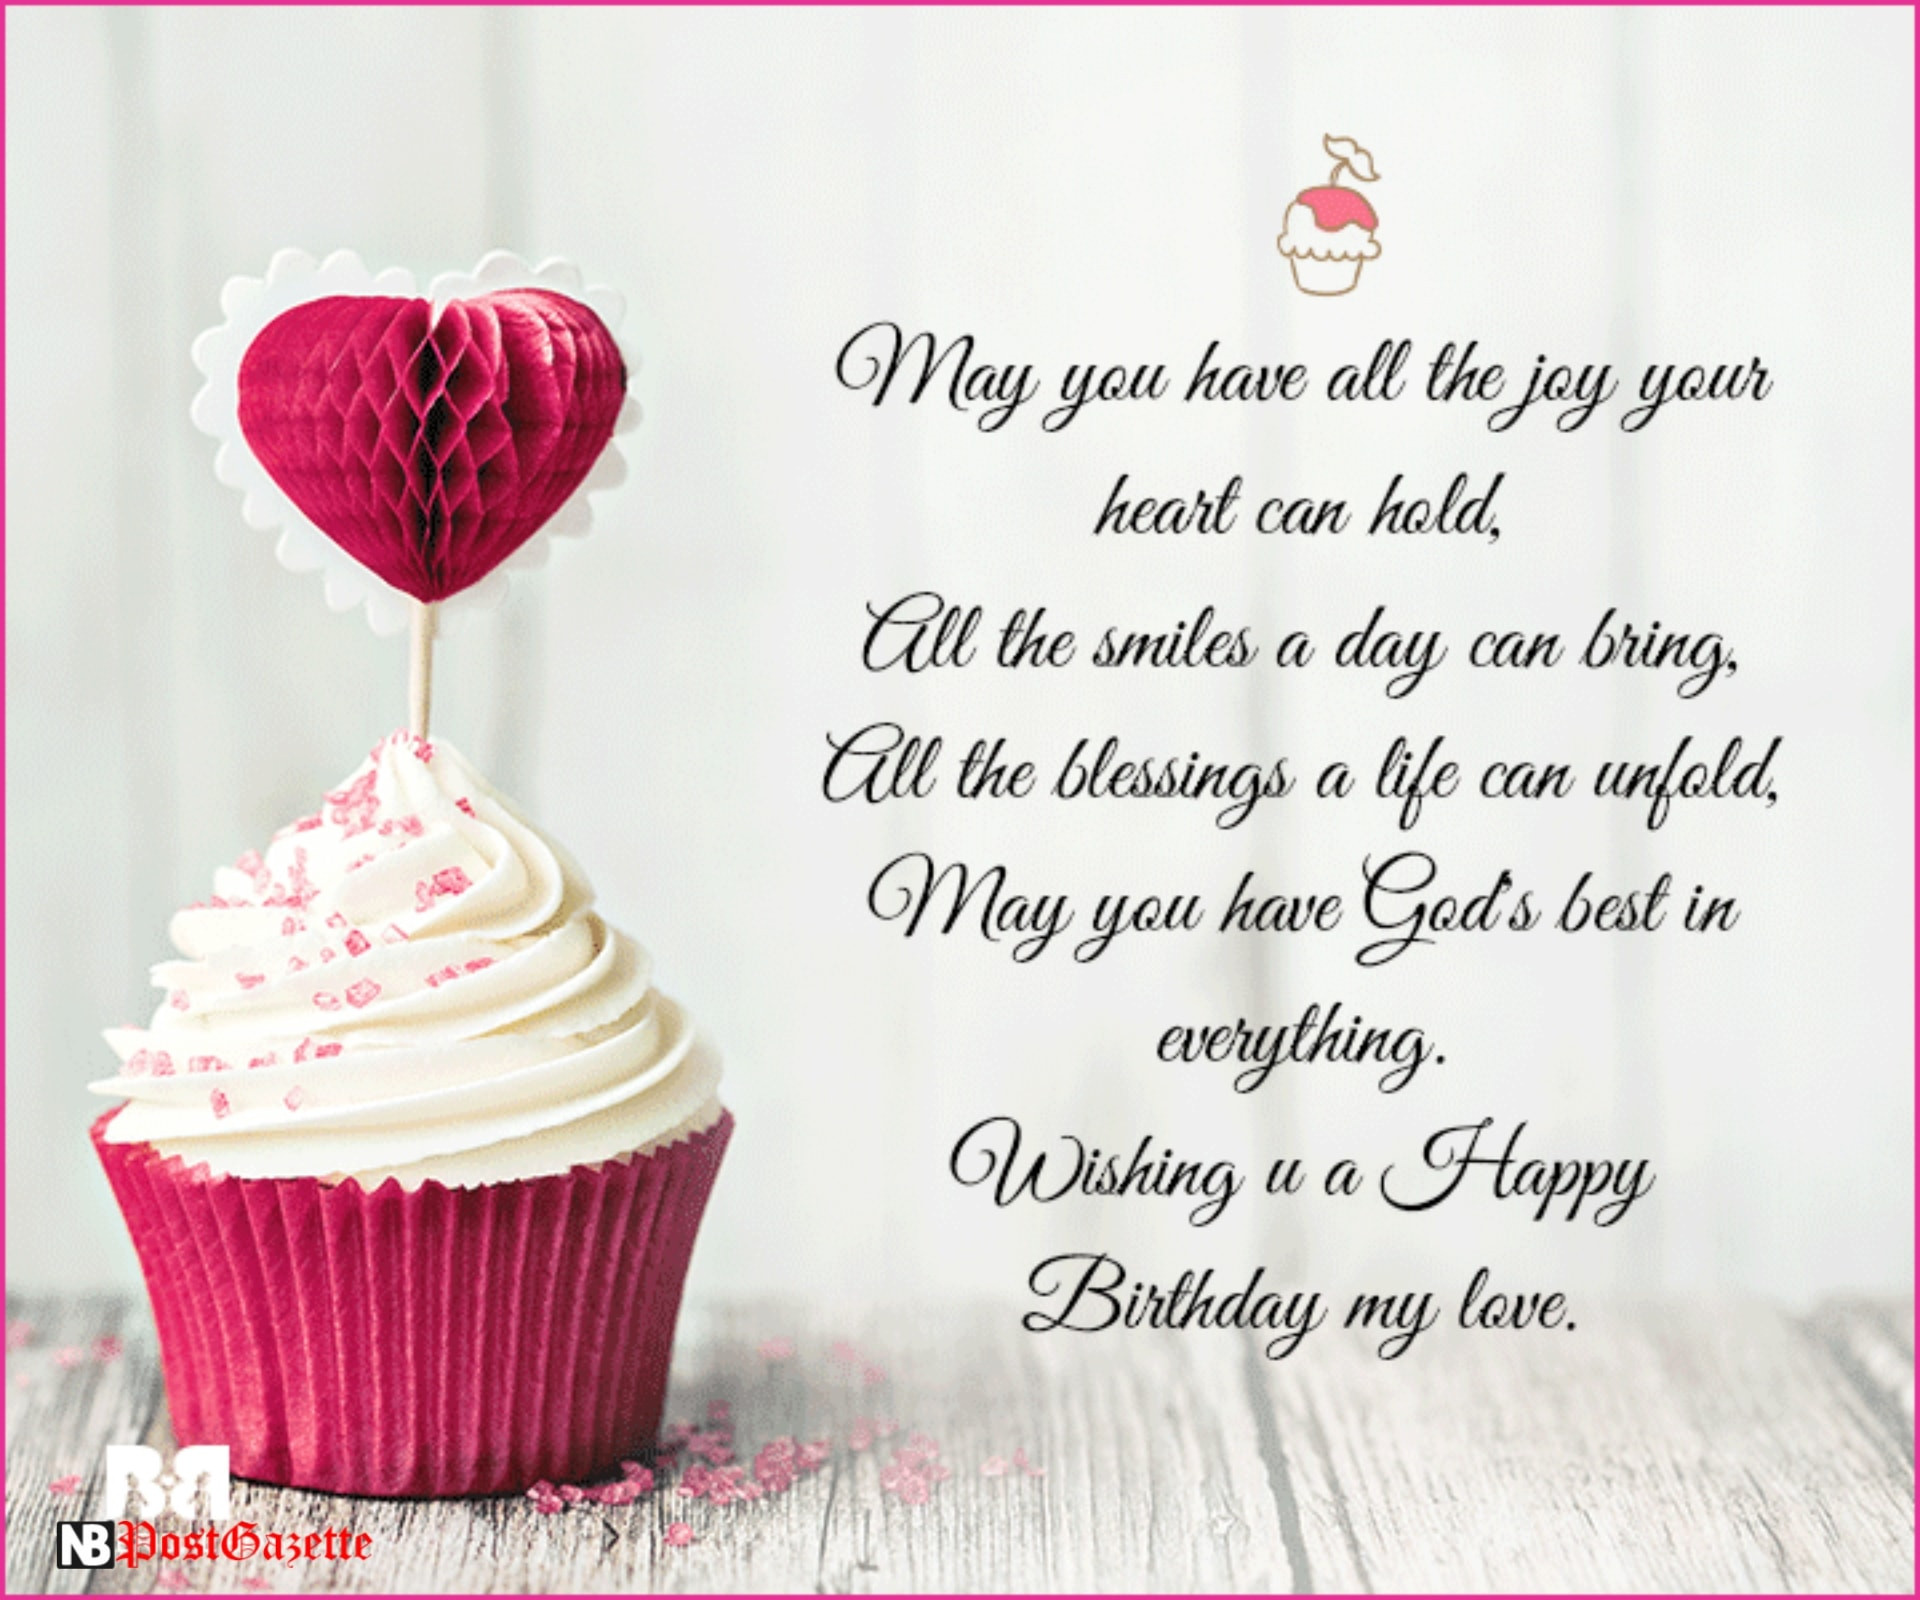 The Best Birthday Wishes
 Top Best Happy Birthday Wishes SMS Quotes & Text Messages